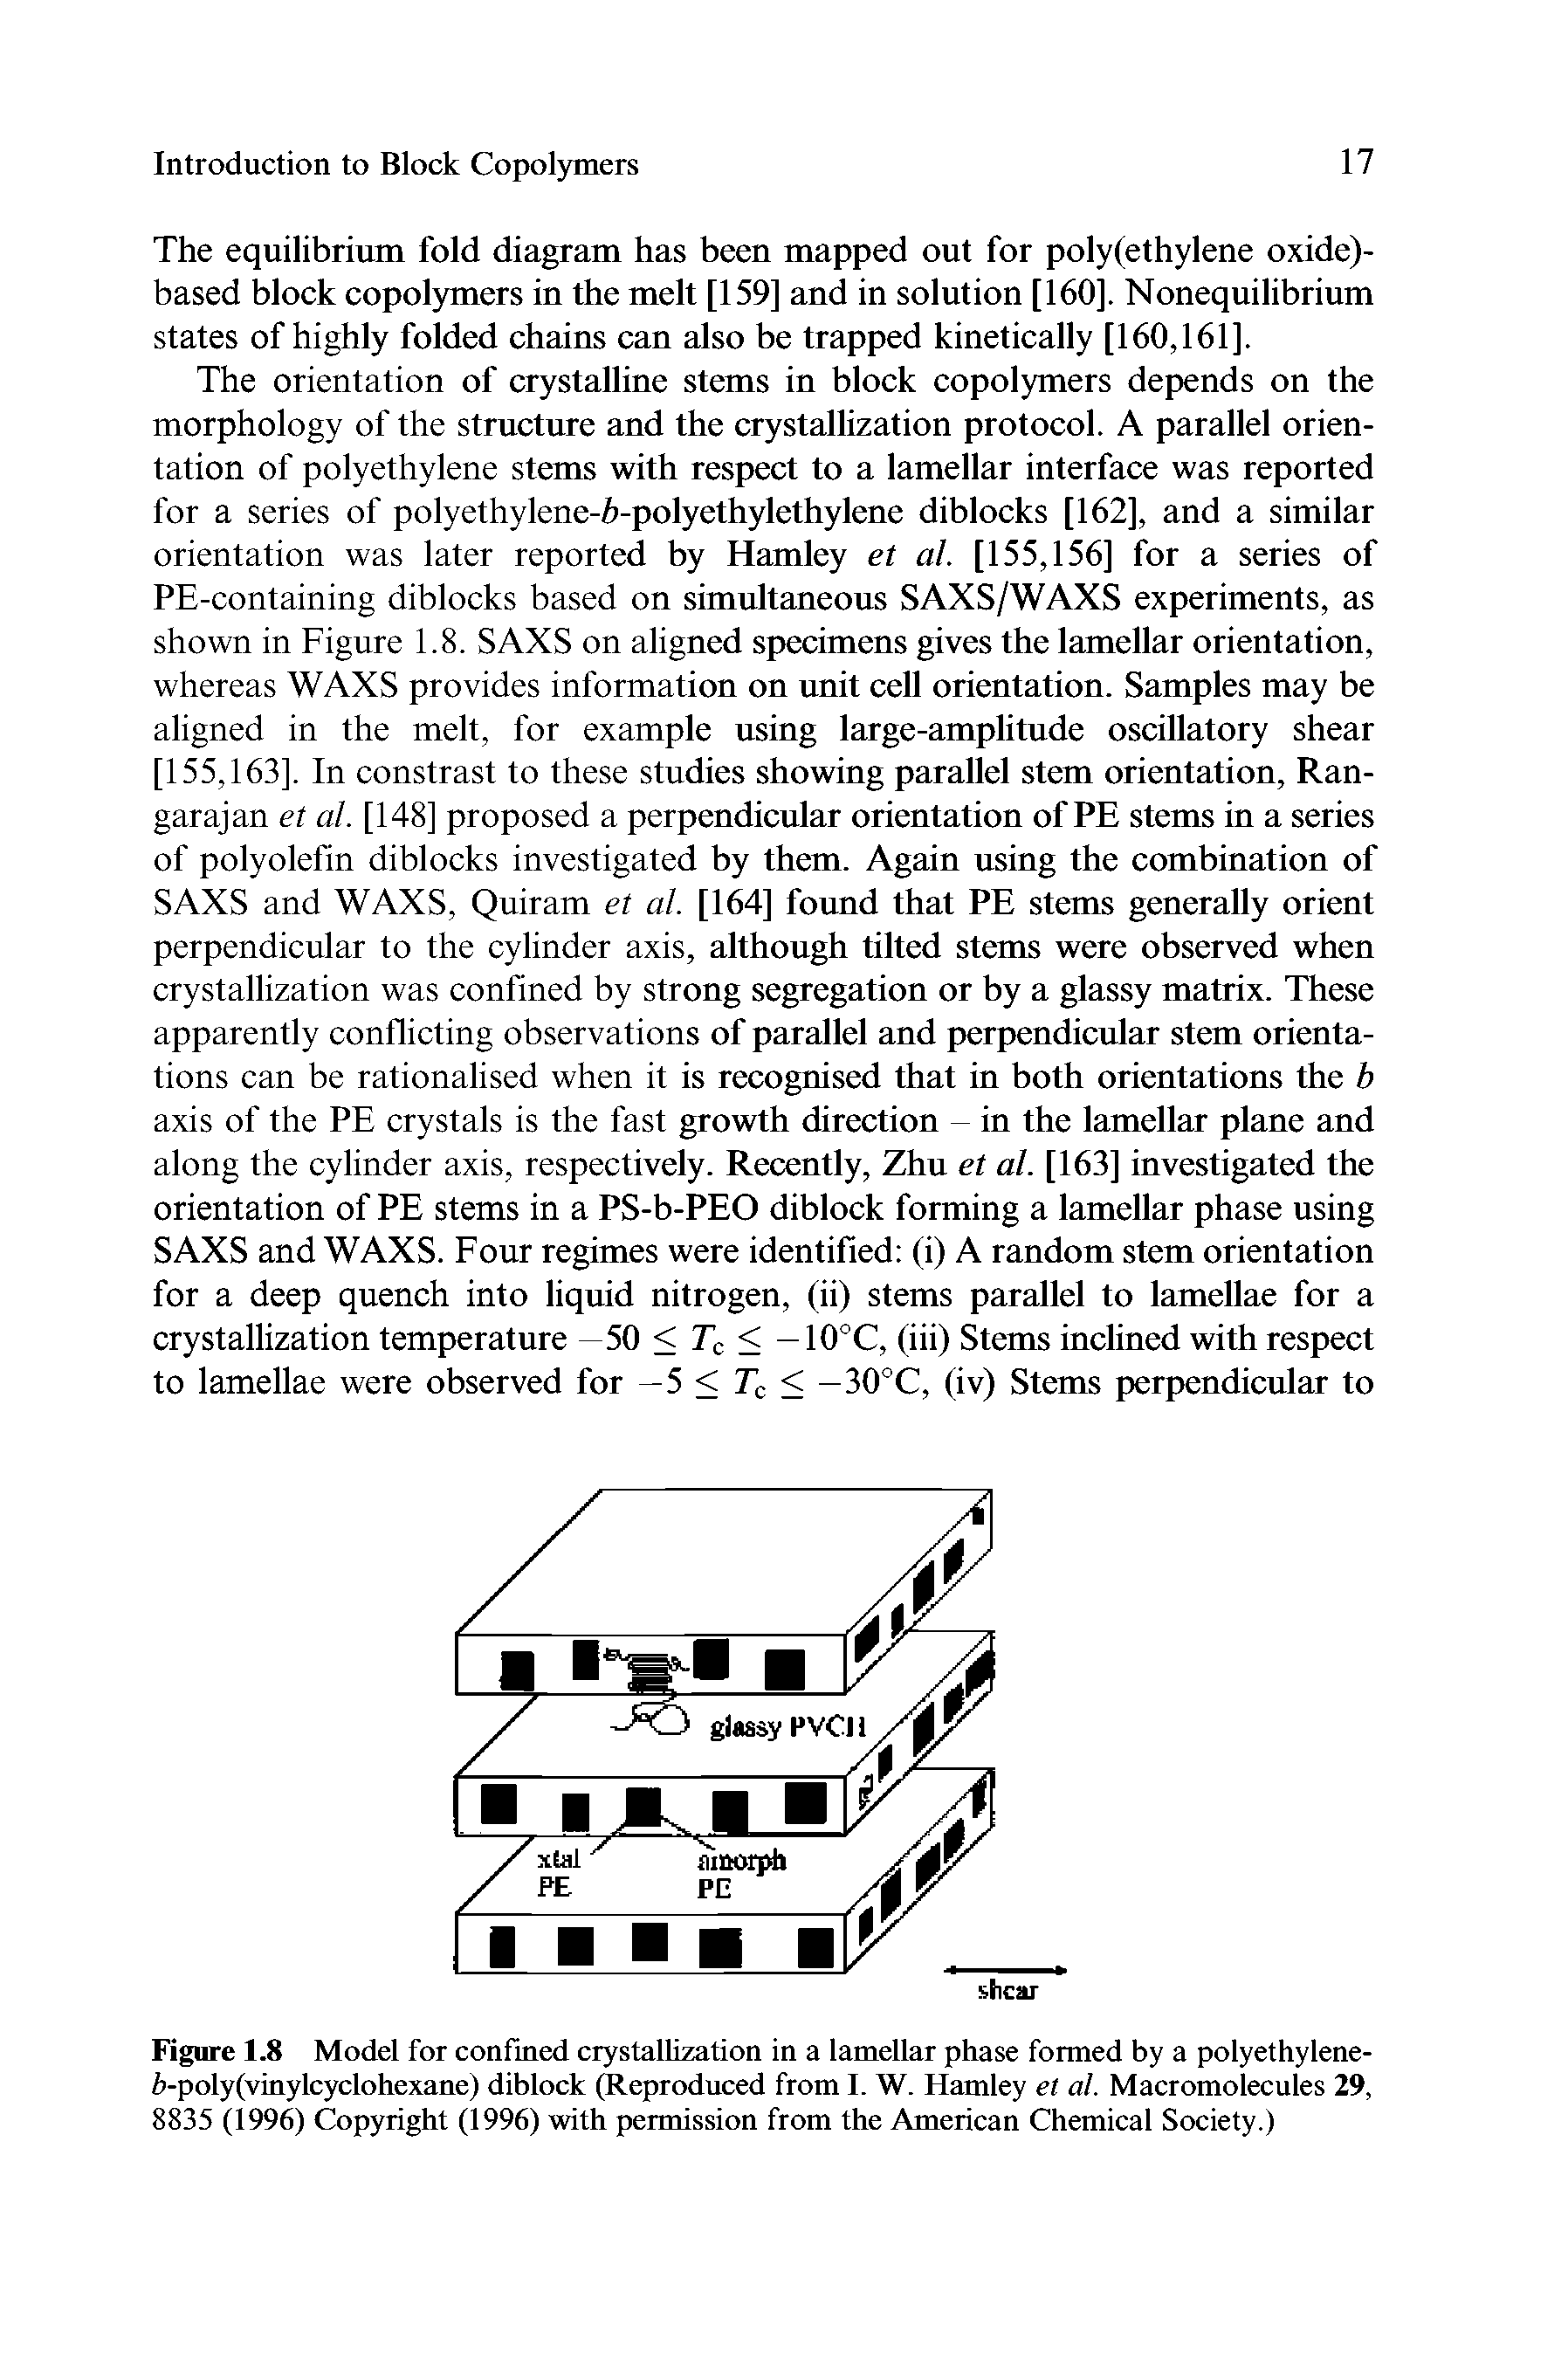 Figure 1.8 Model for confined crystallization in a lamellar phase formed by a polyethylene-i>-poly(vinylcyclohexane) diblock (Reproduced from I. W. Hamley et al. Macromolecules 29, 8835 (1996) Copyright (1996) with permission from the American Chemical Society.)...